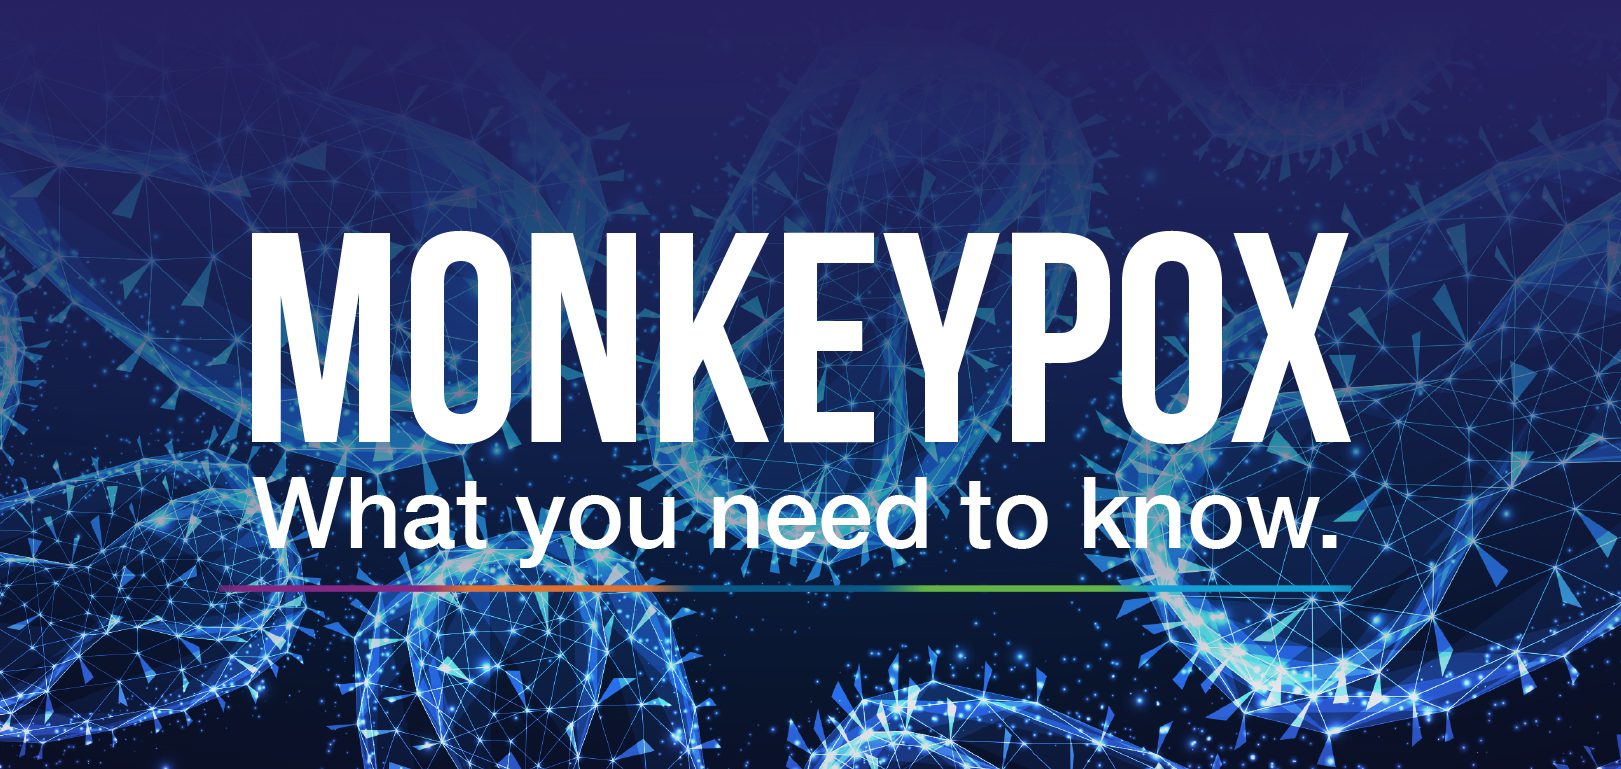 Monkeypox: What you need to know.